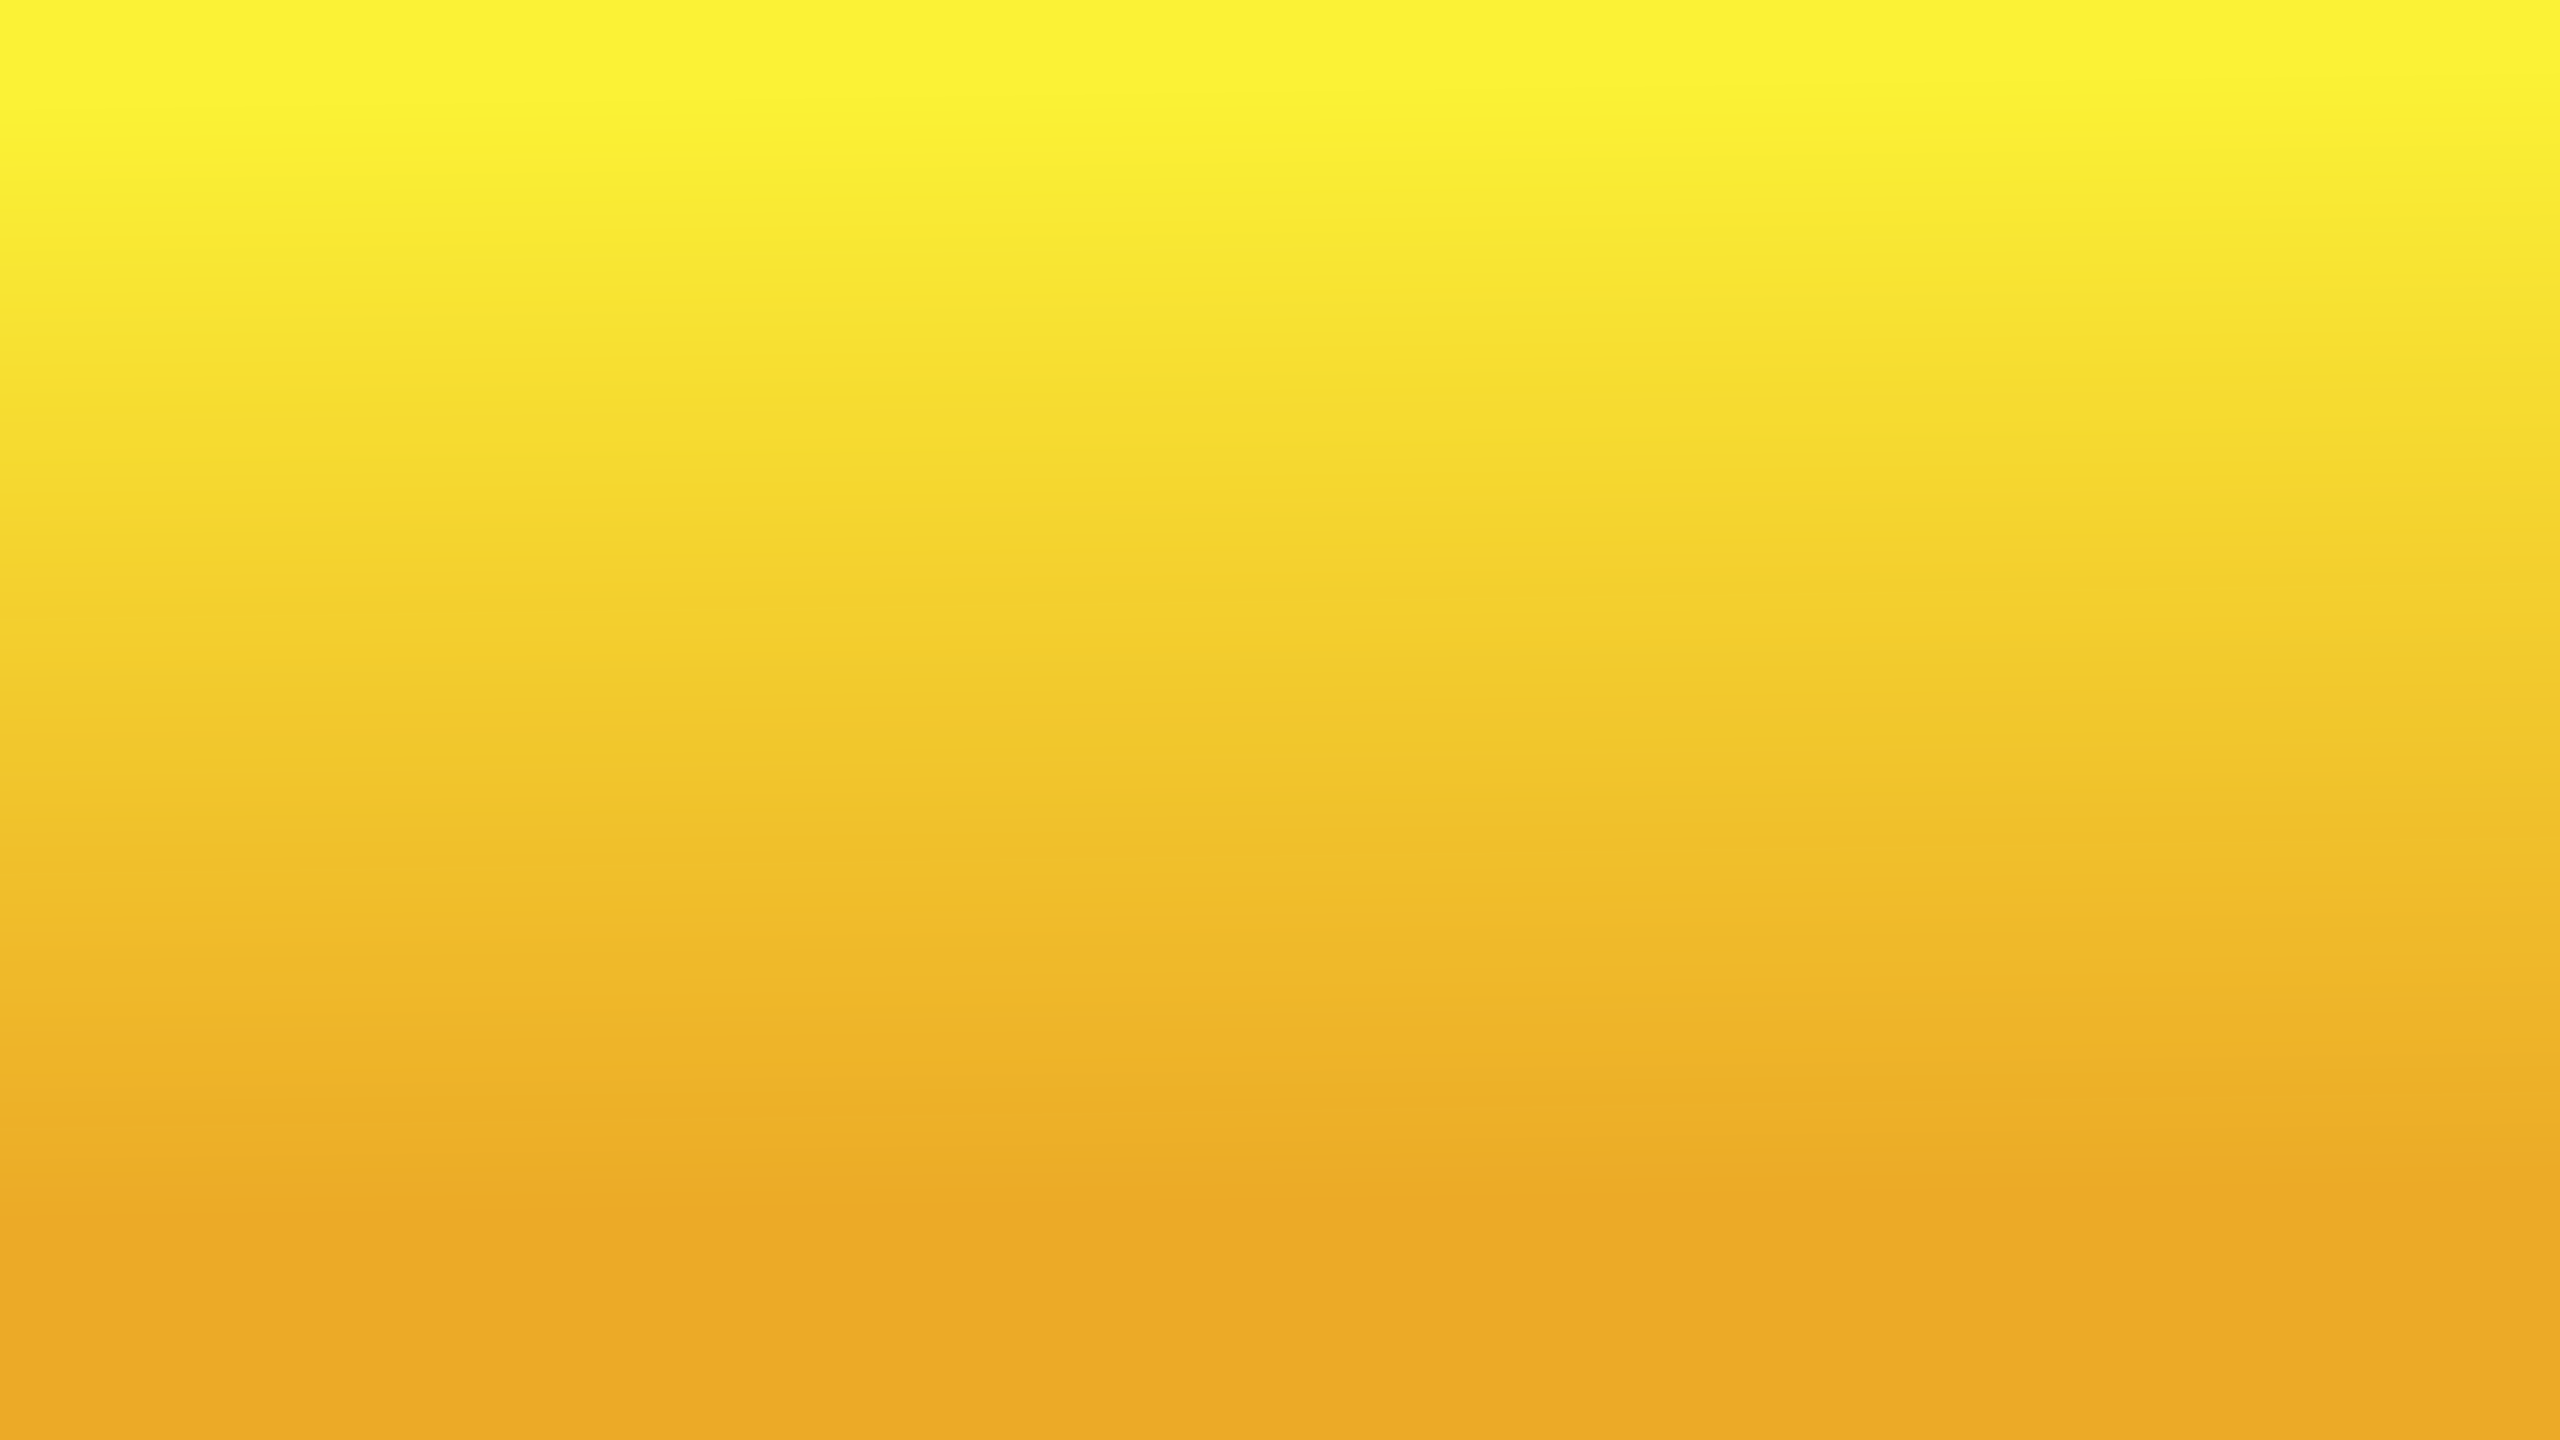 Download Preview - Fade Yellow Orange Background PNG Image with No  Background 